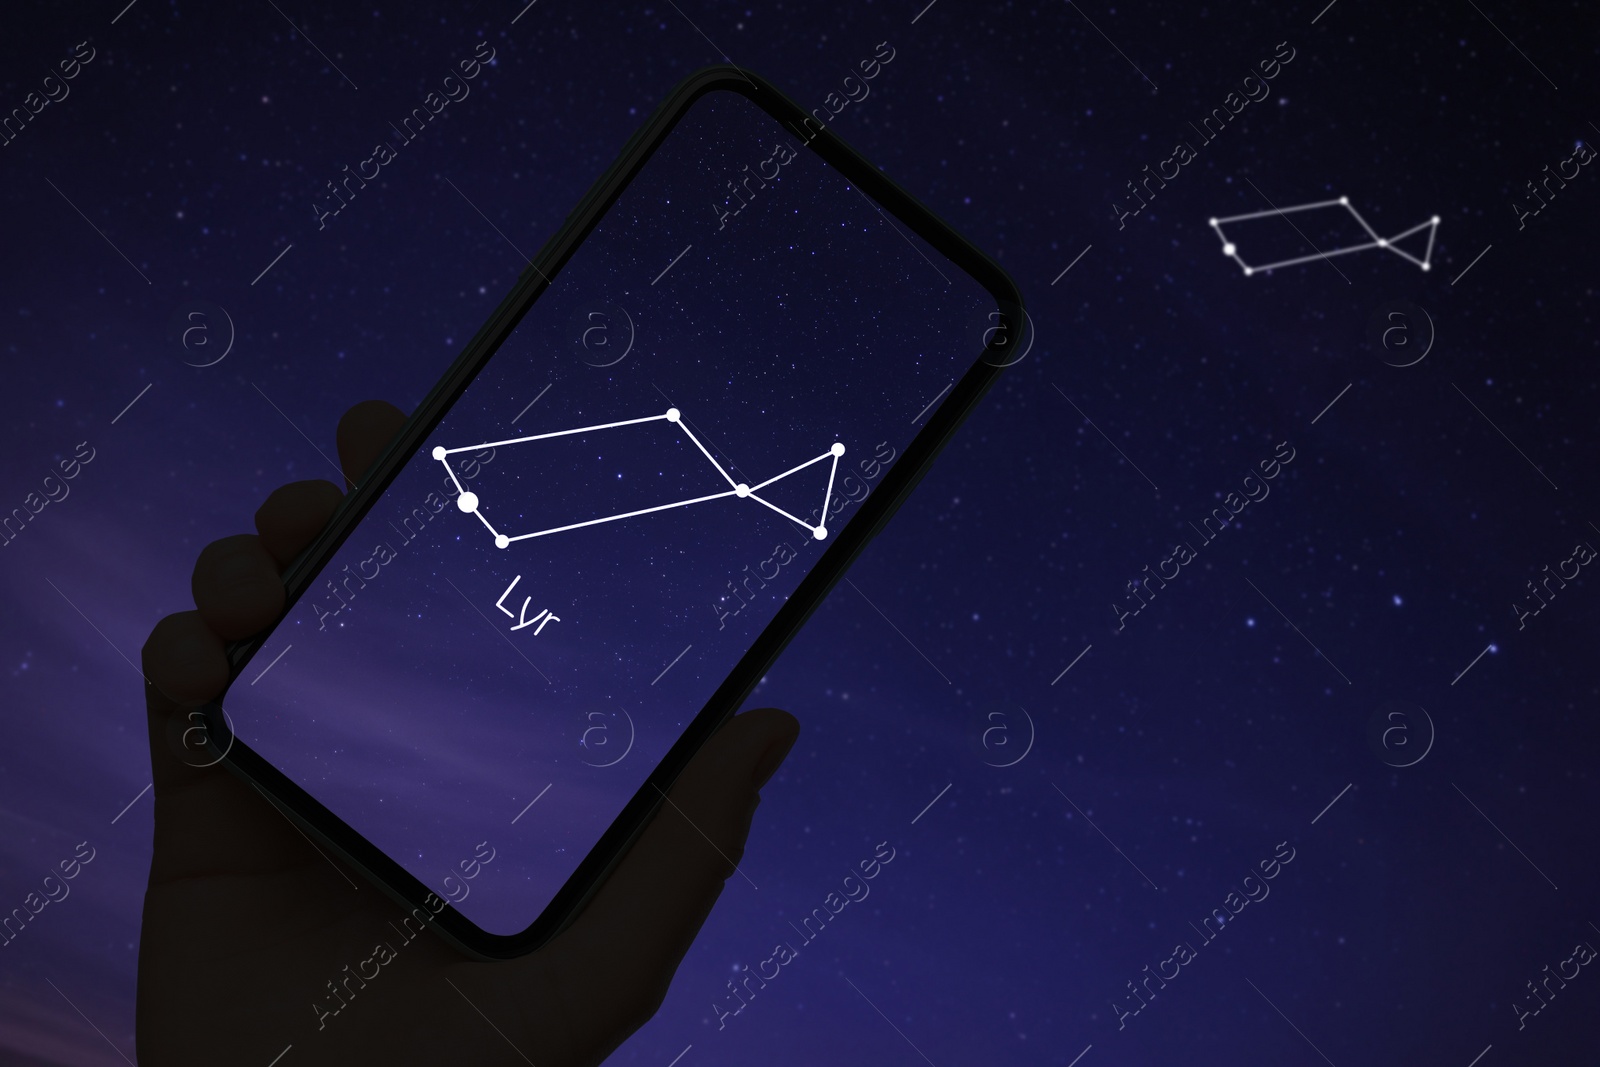 Image of Woman using stargazing app on her phone at night, closeup. Identified stick figure pattern of Lyra constellation on device screen